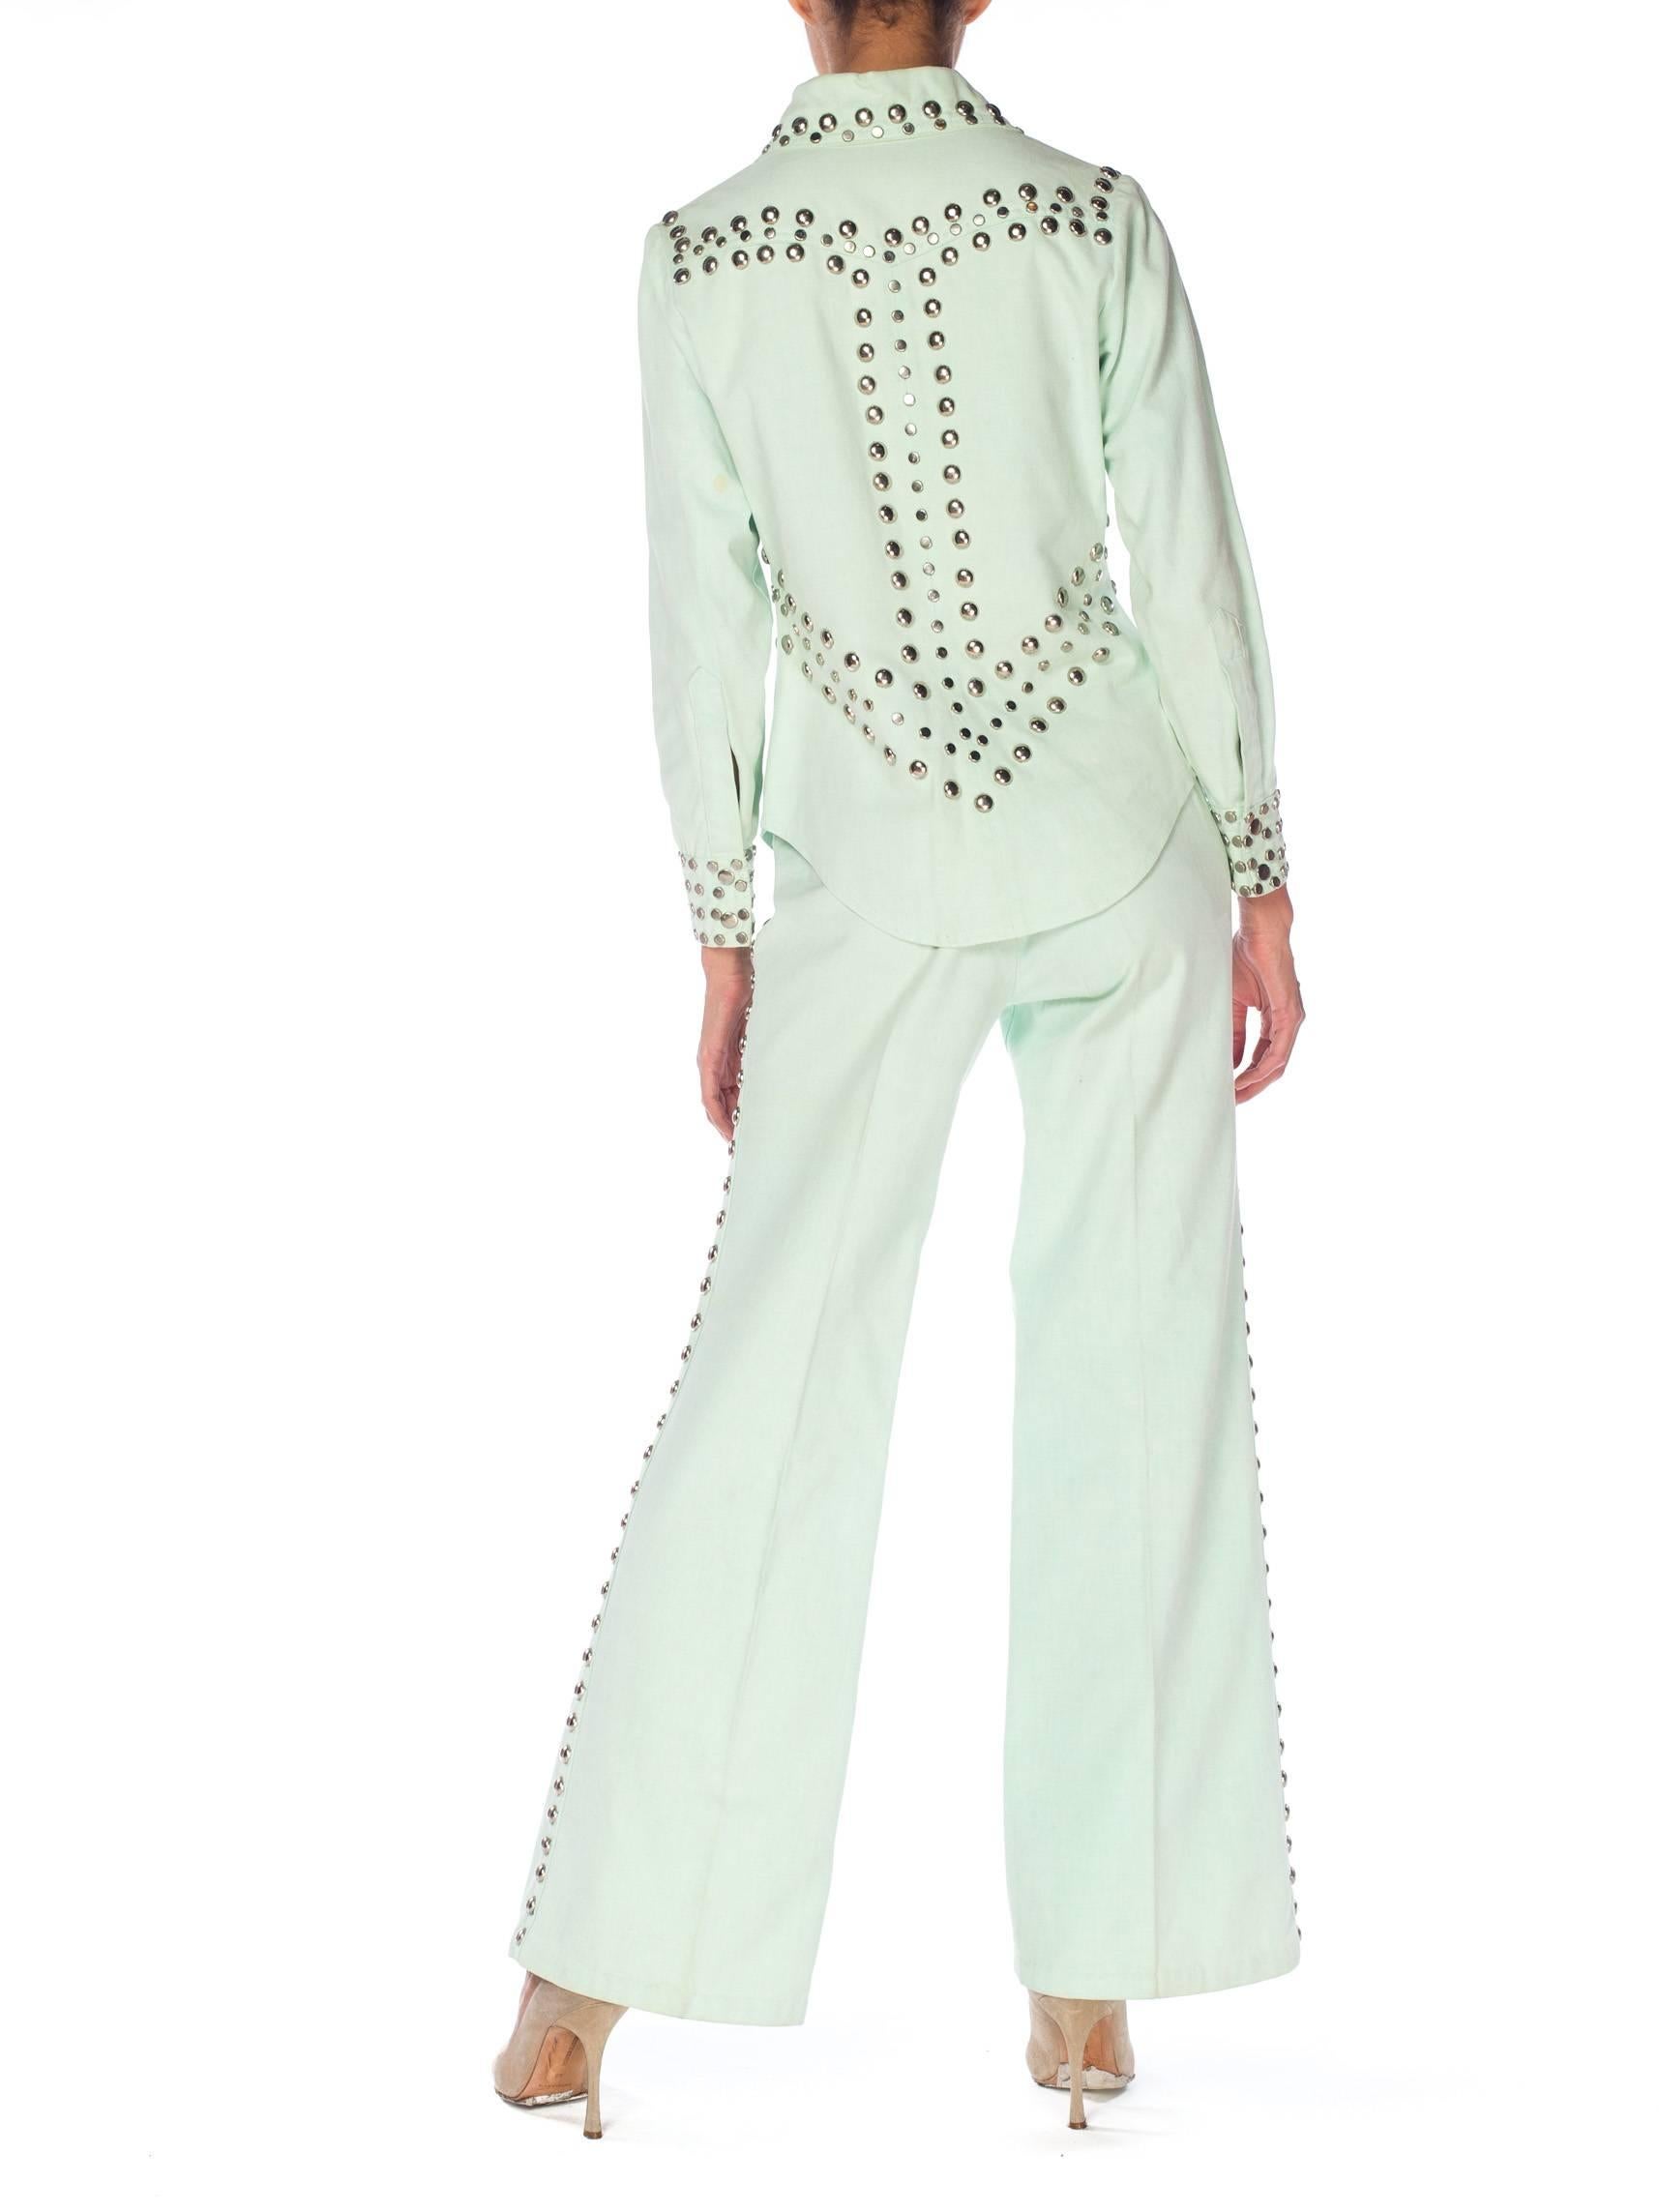 Gray 1970S Mint Green Cotton Denim Studded Two Piece Jacket And Jeans Pant Suit